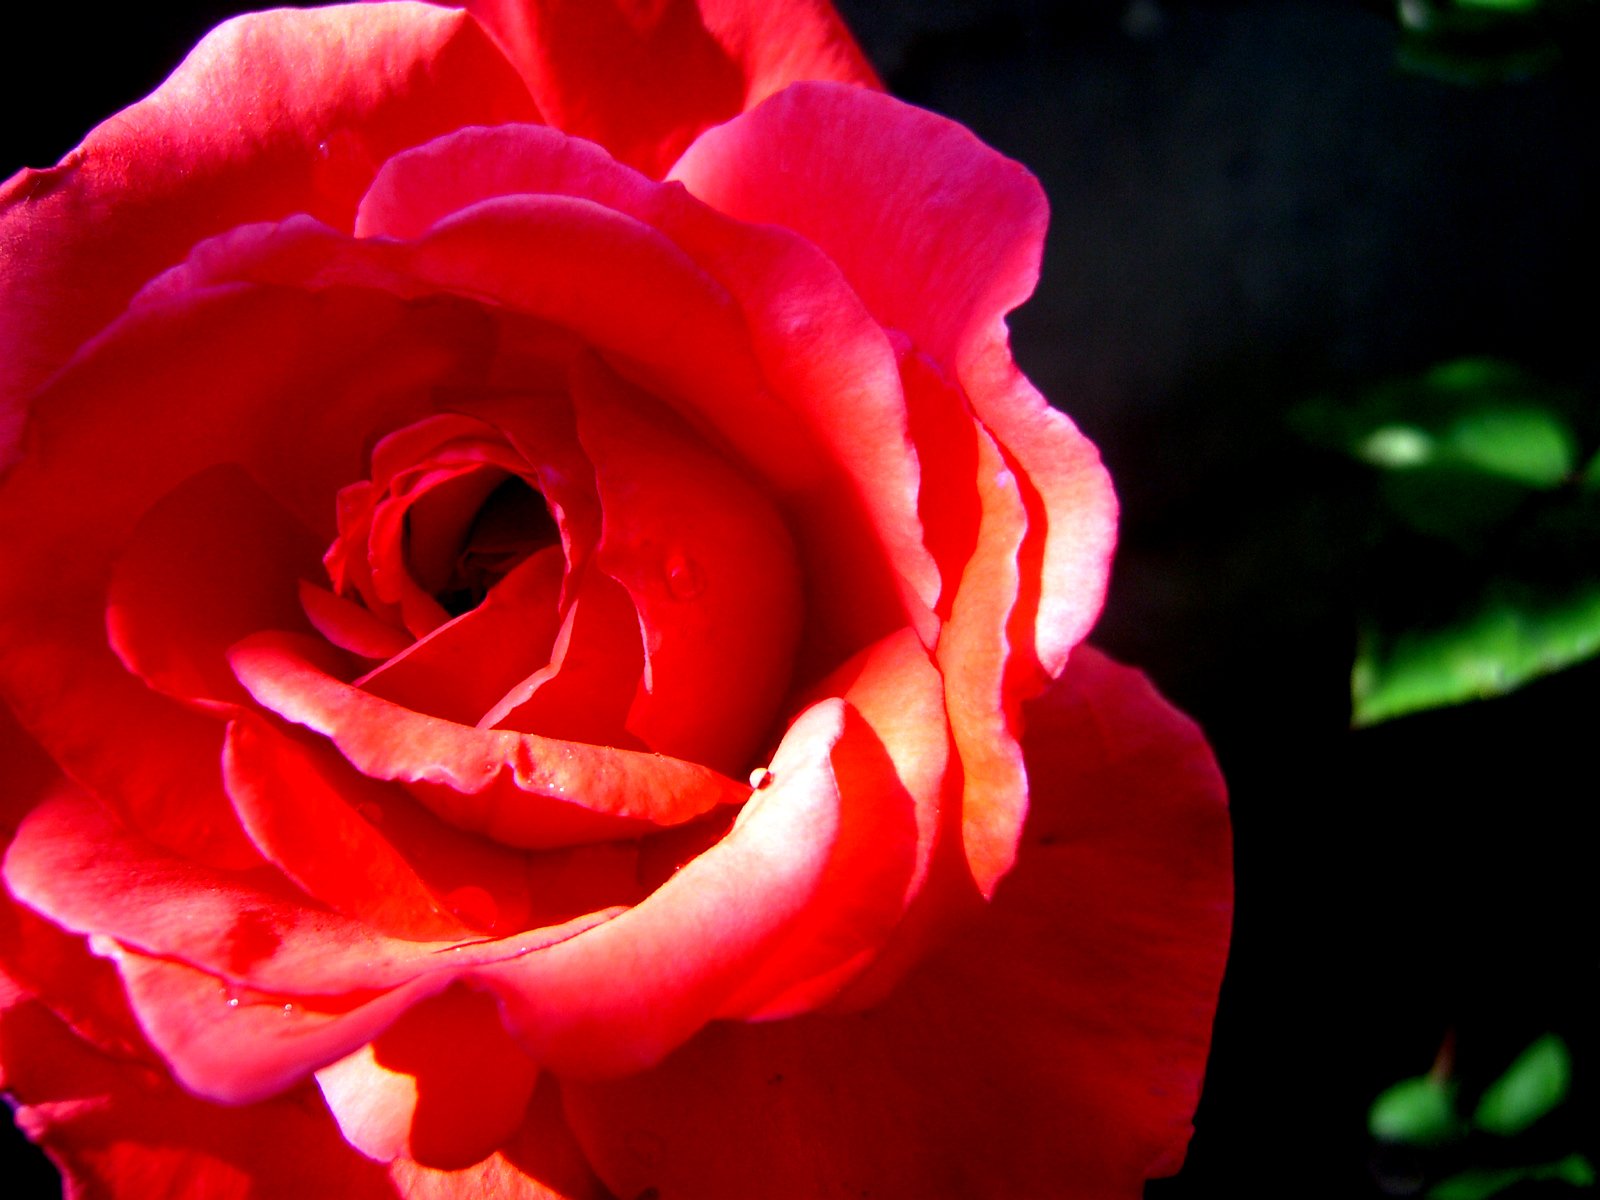 a rose is blooming in front of a black background